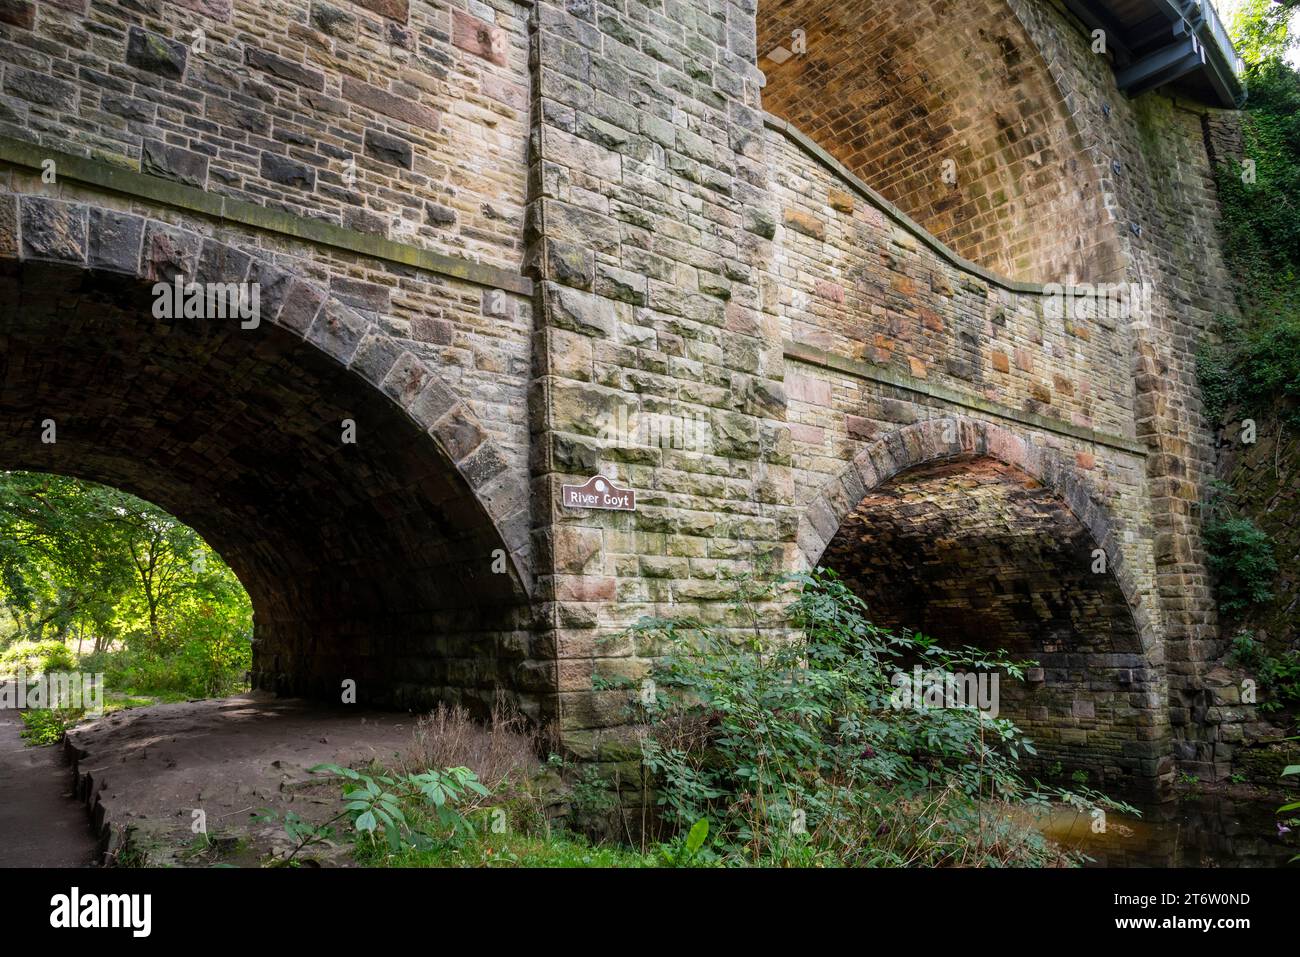 The Torrs Riverside Park at New Mills, Derbyshire, England. Stock Photo